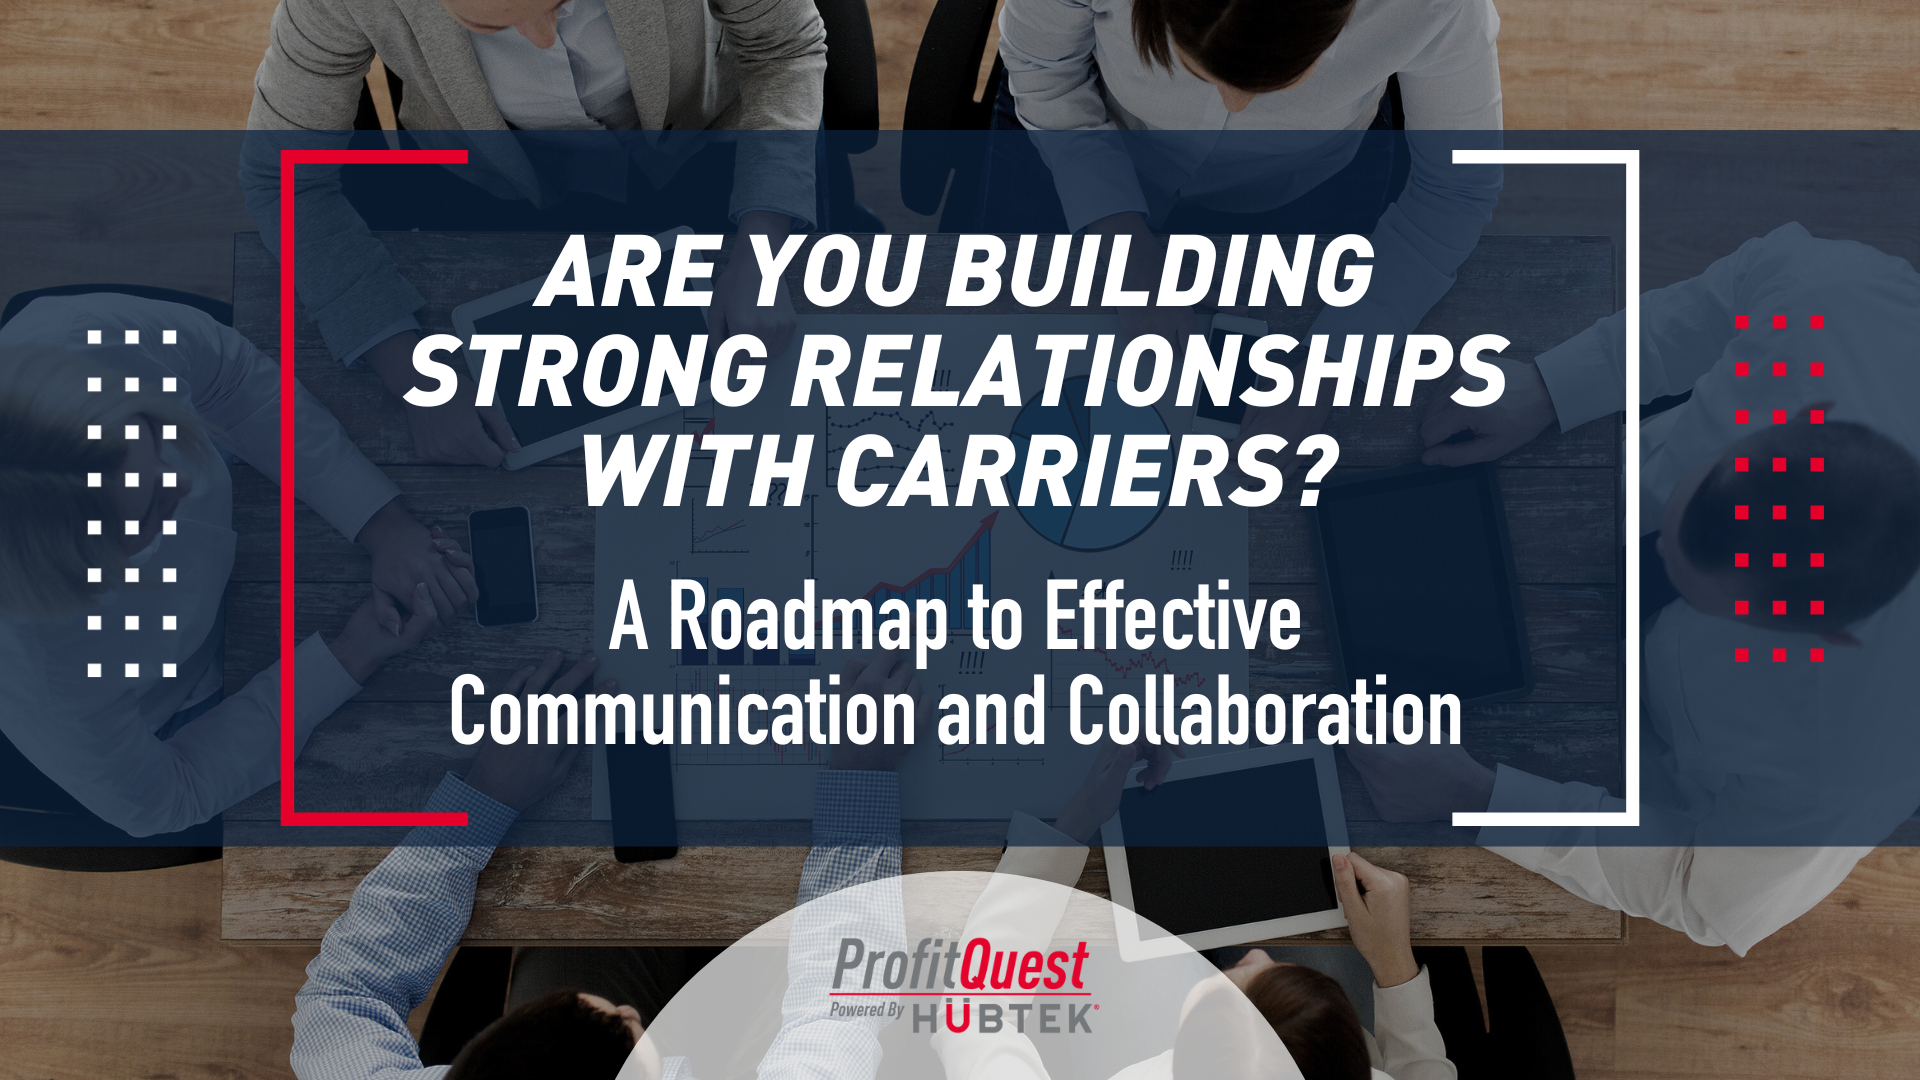 Are You Building Strong Relationships with Carriers? A Roadmap to Effective Communication and Collaboration